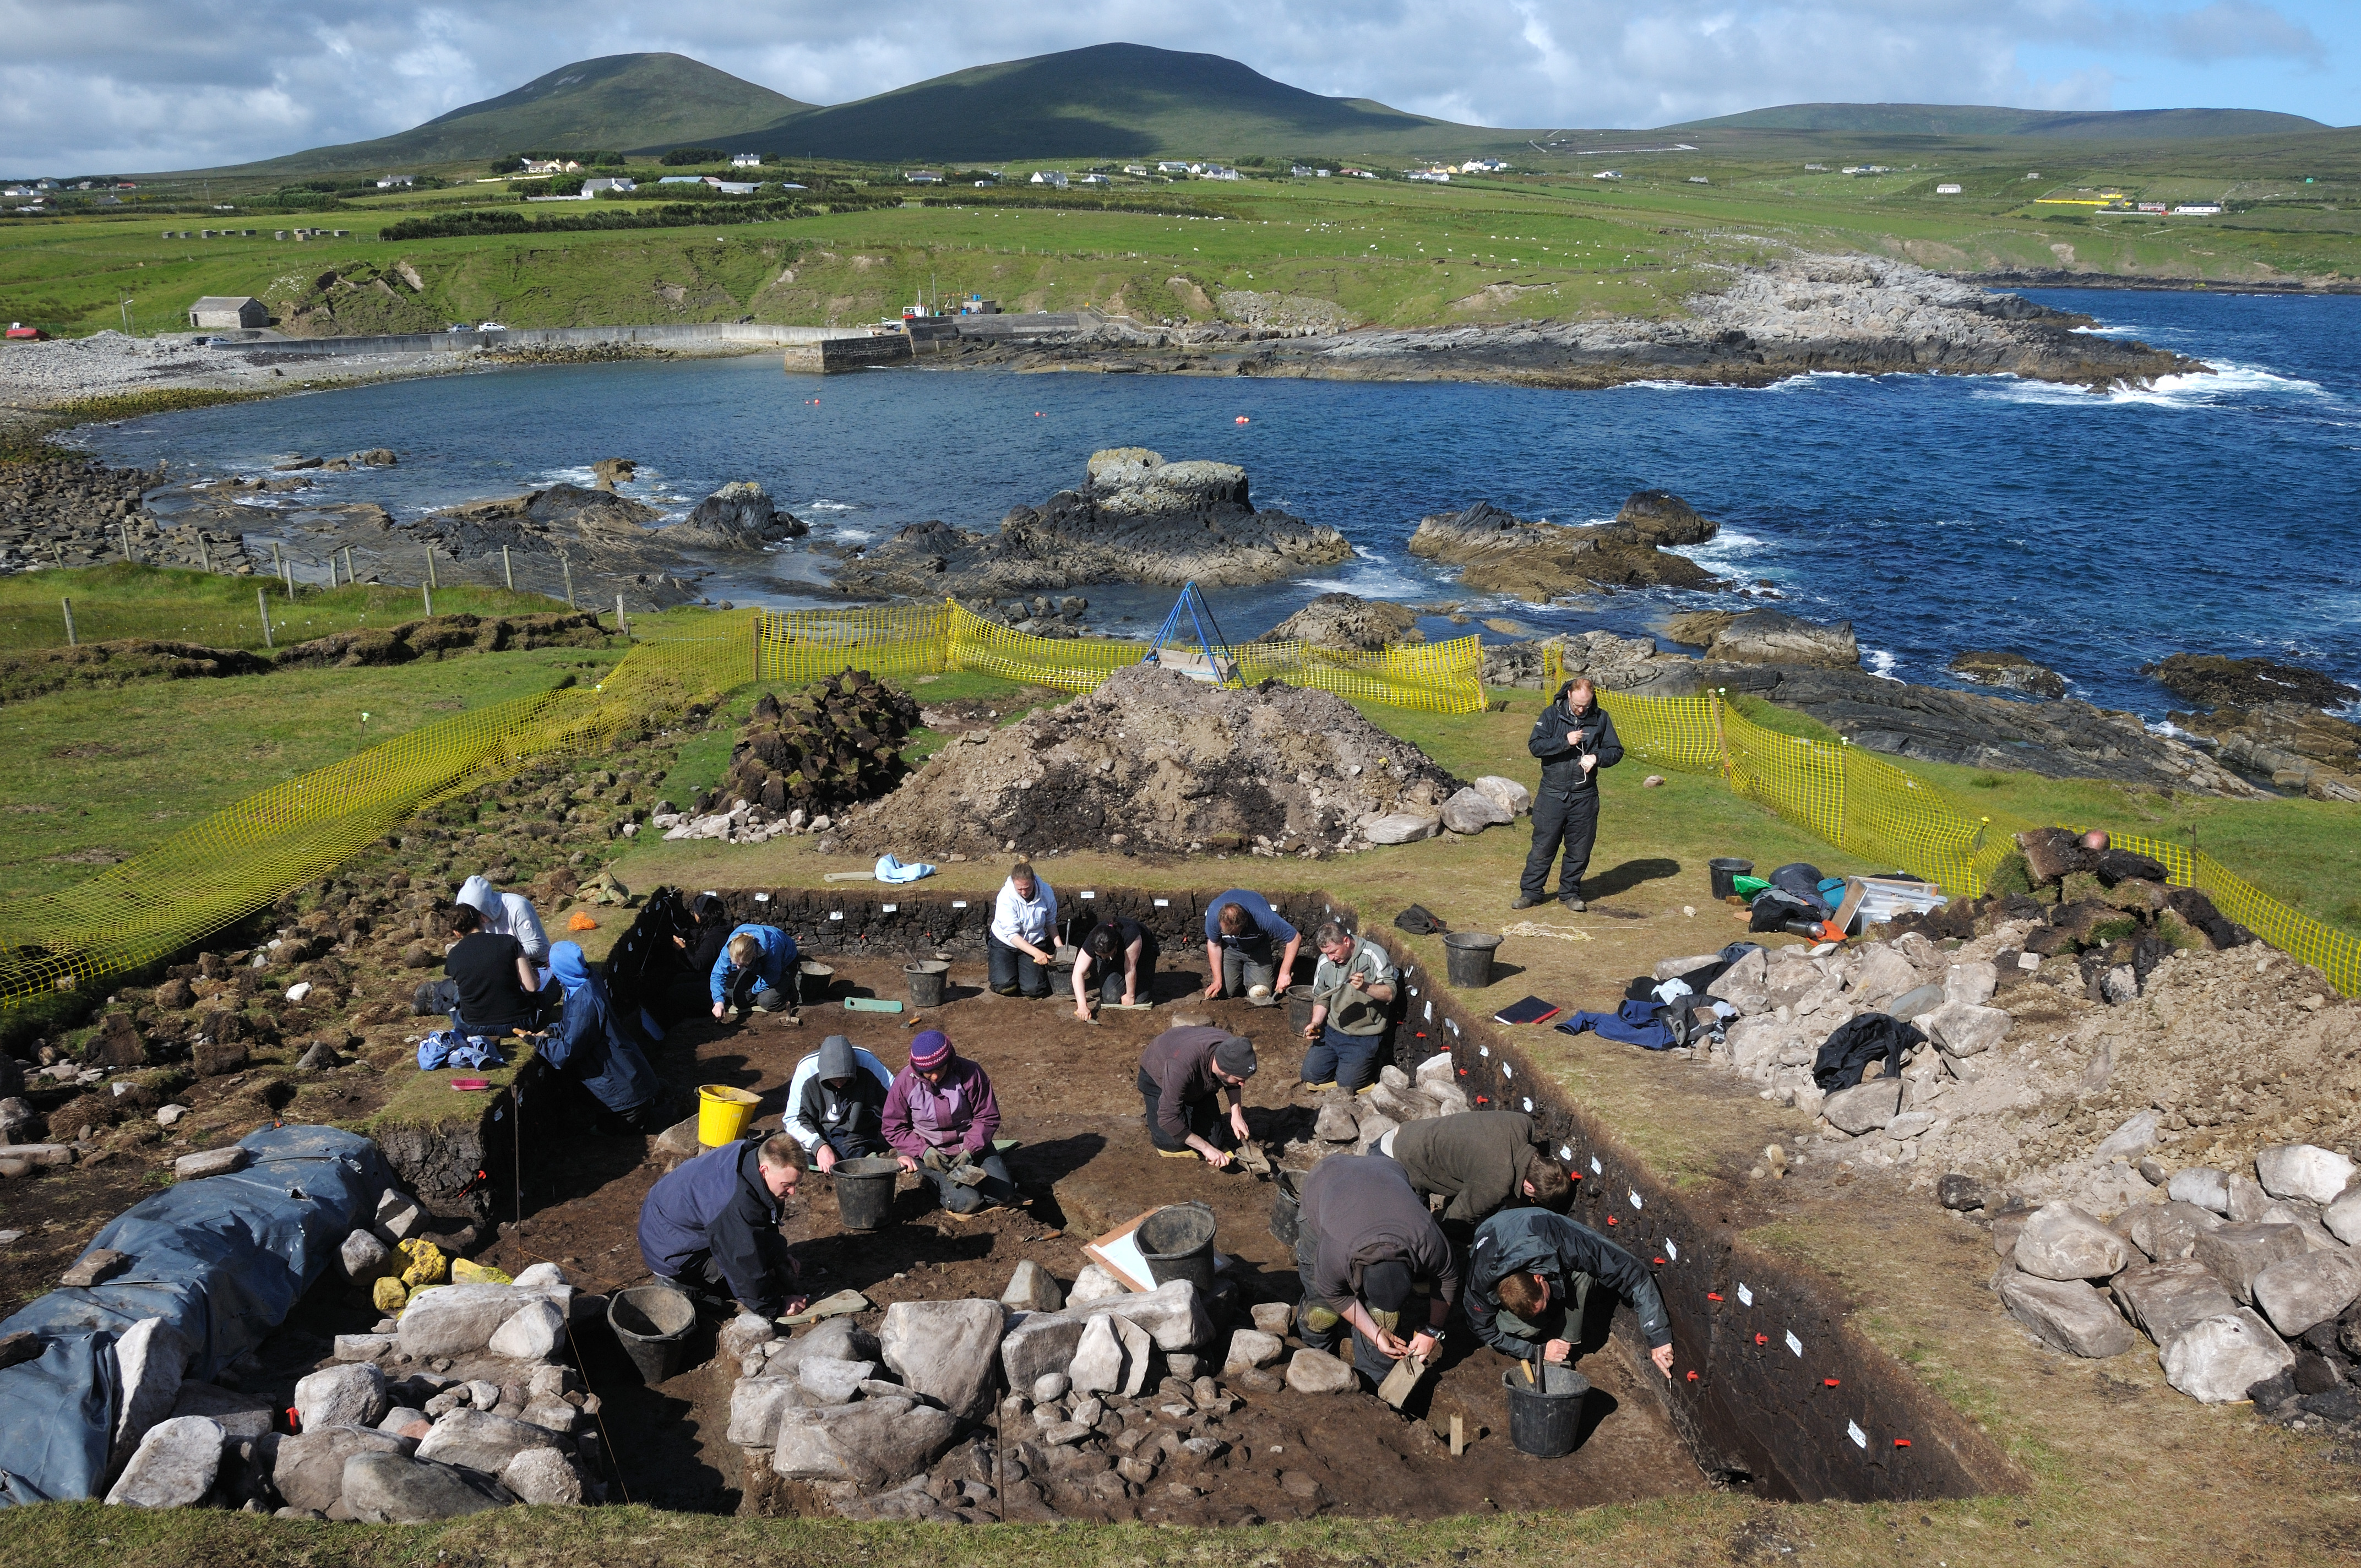 Excavations of Mesolithic and Neolithic site at Belderrig, Co. Mayo